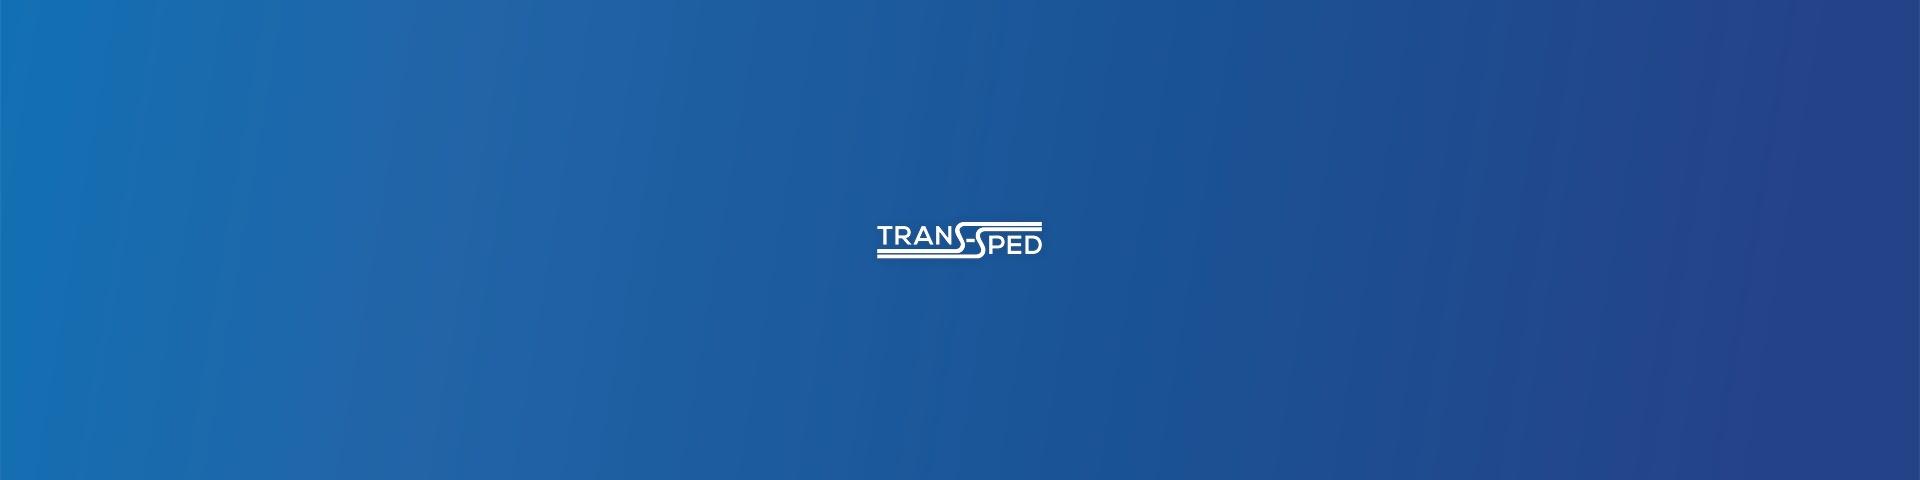 Trans-Sped is supporting it's customers by managing thair air and sea freights.